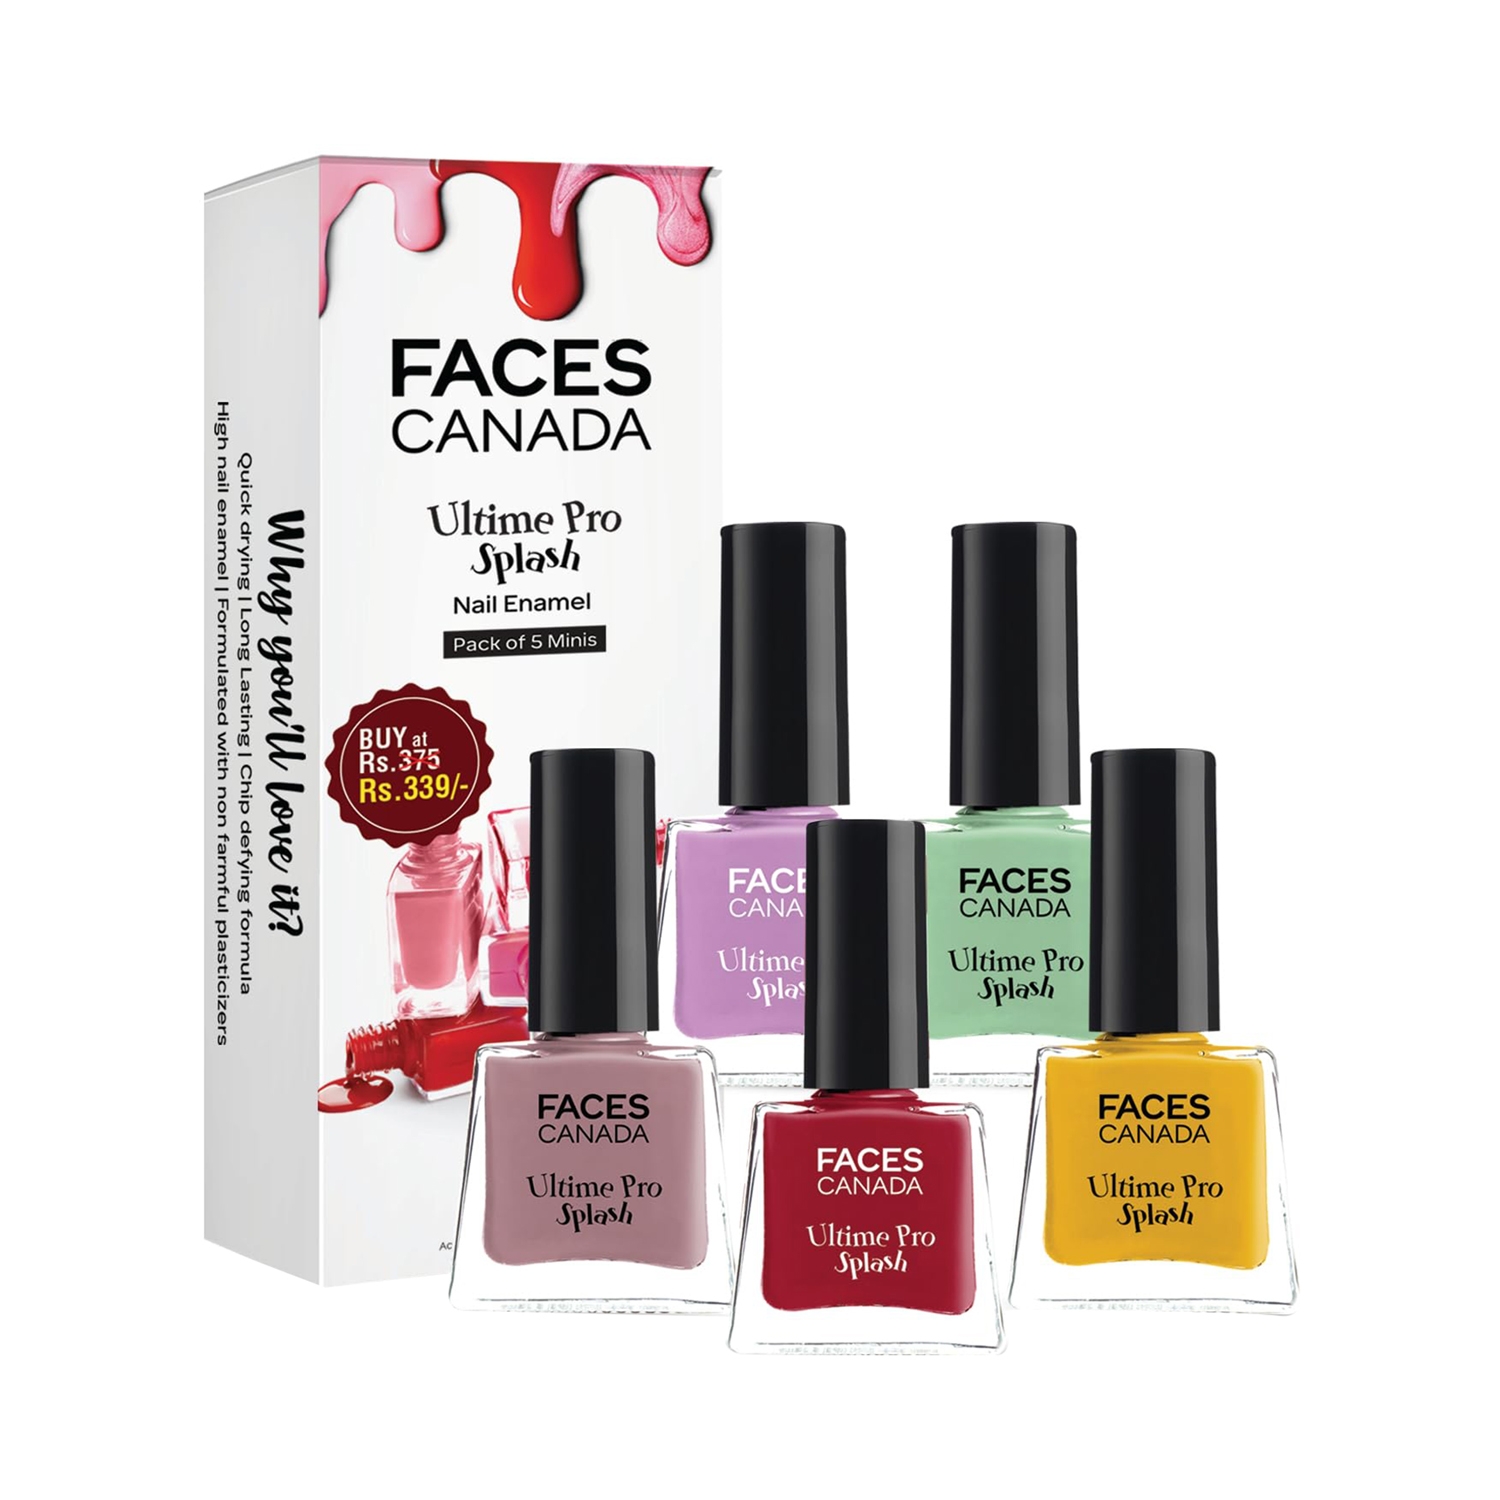 RENEE Gloss Touch Set of 4 Nail Enamels, 5ml each